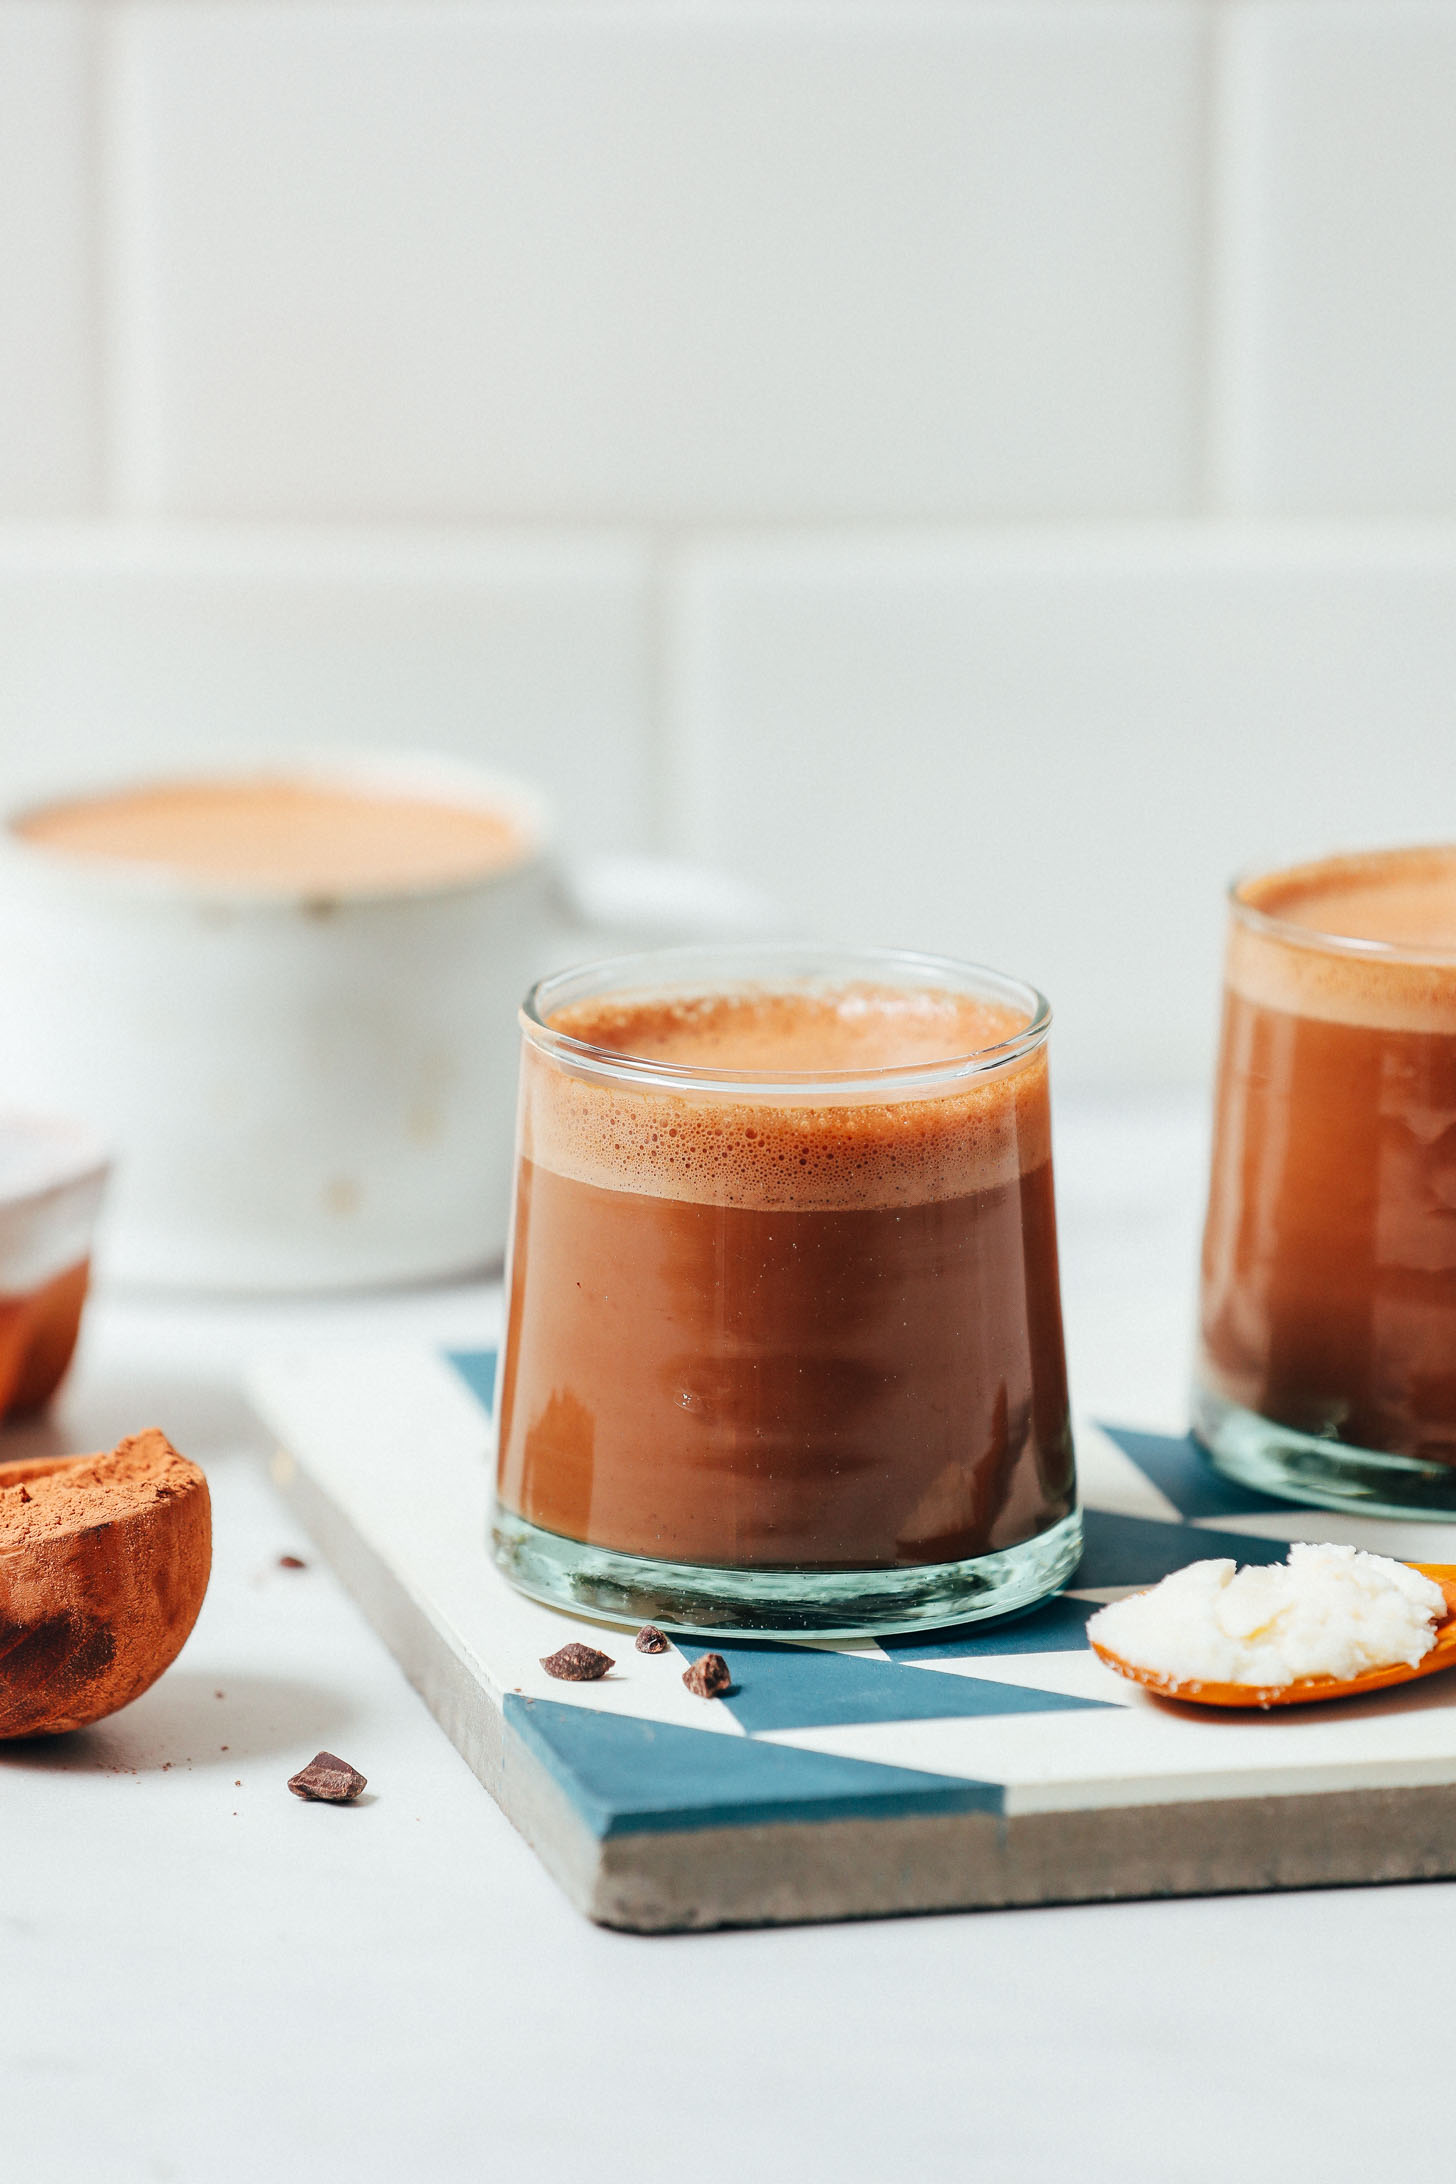 Glasses of our Low Sugar Adaptogenic Hot Chocolate recipe